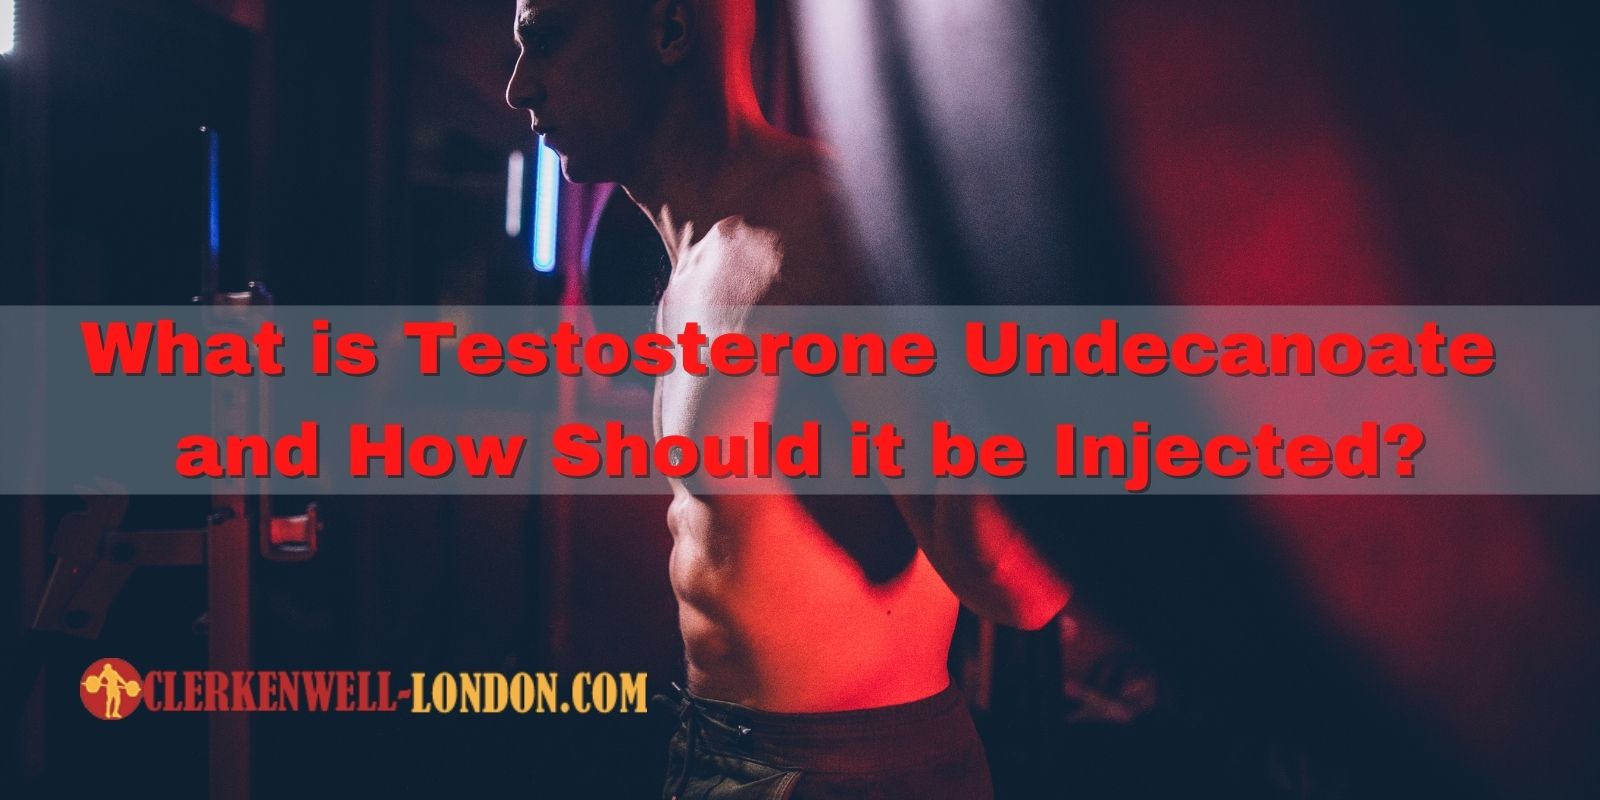 What is Testosterone Undecanoate and How Should it be Injected?